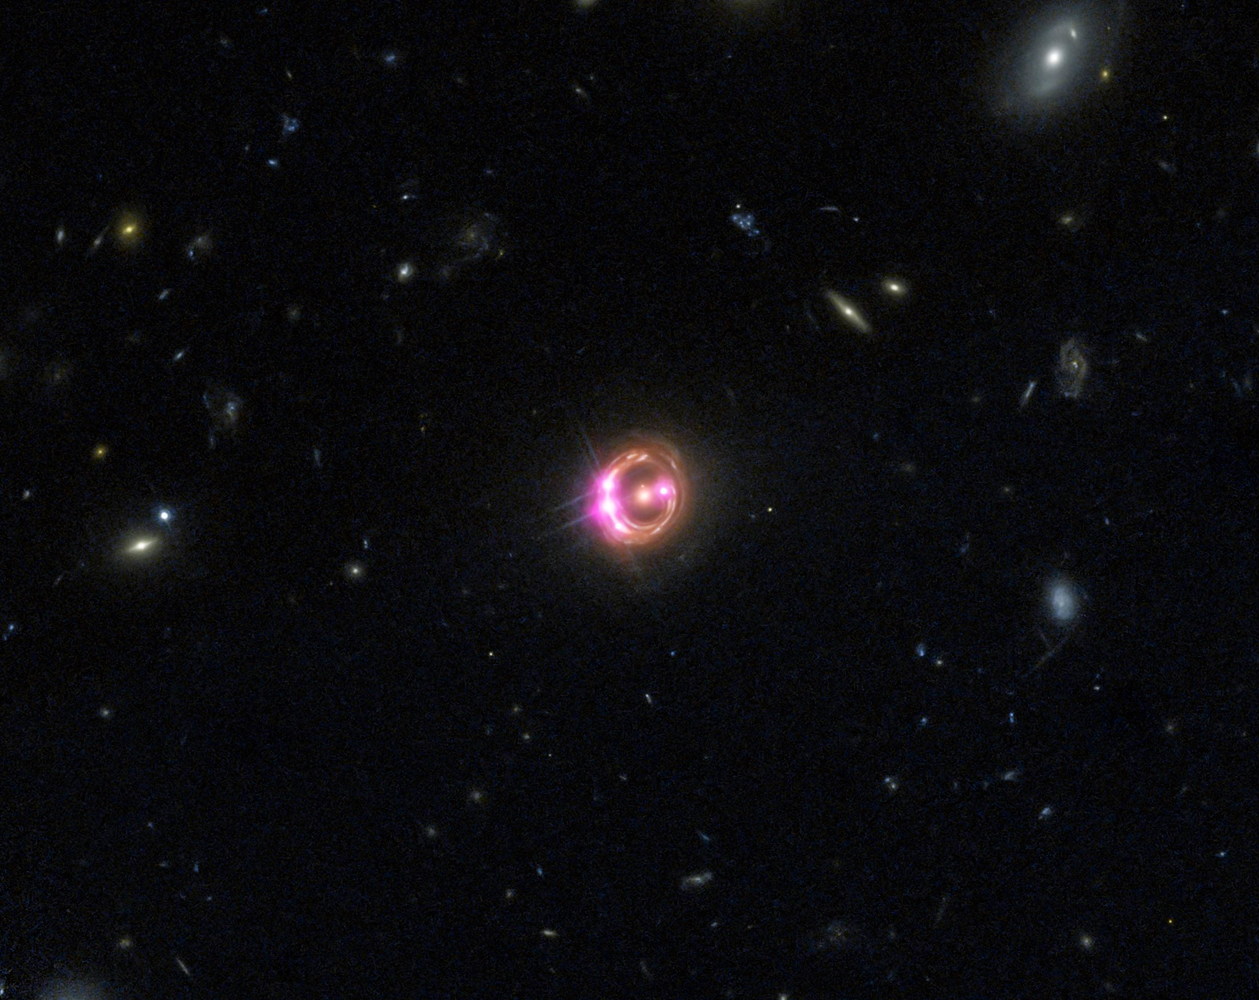 Multiple images of a distant quasar are visible in this combined view from NASA’s Chandra X-ray Observatory and the Hubble Space Telescope.